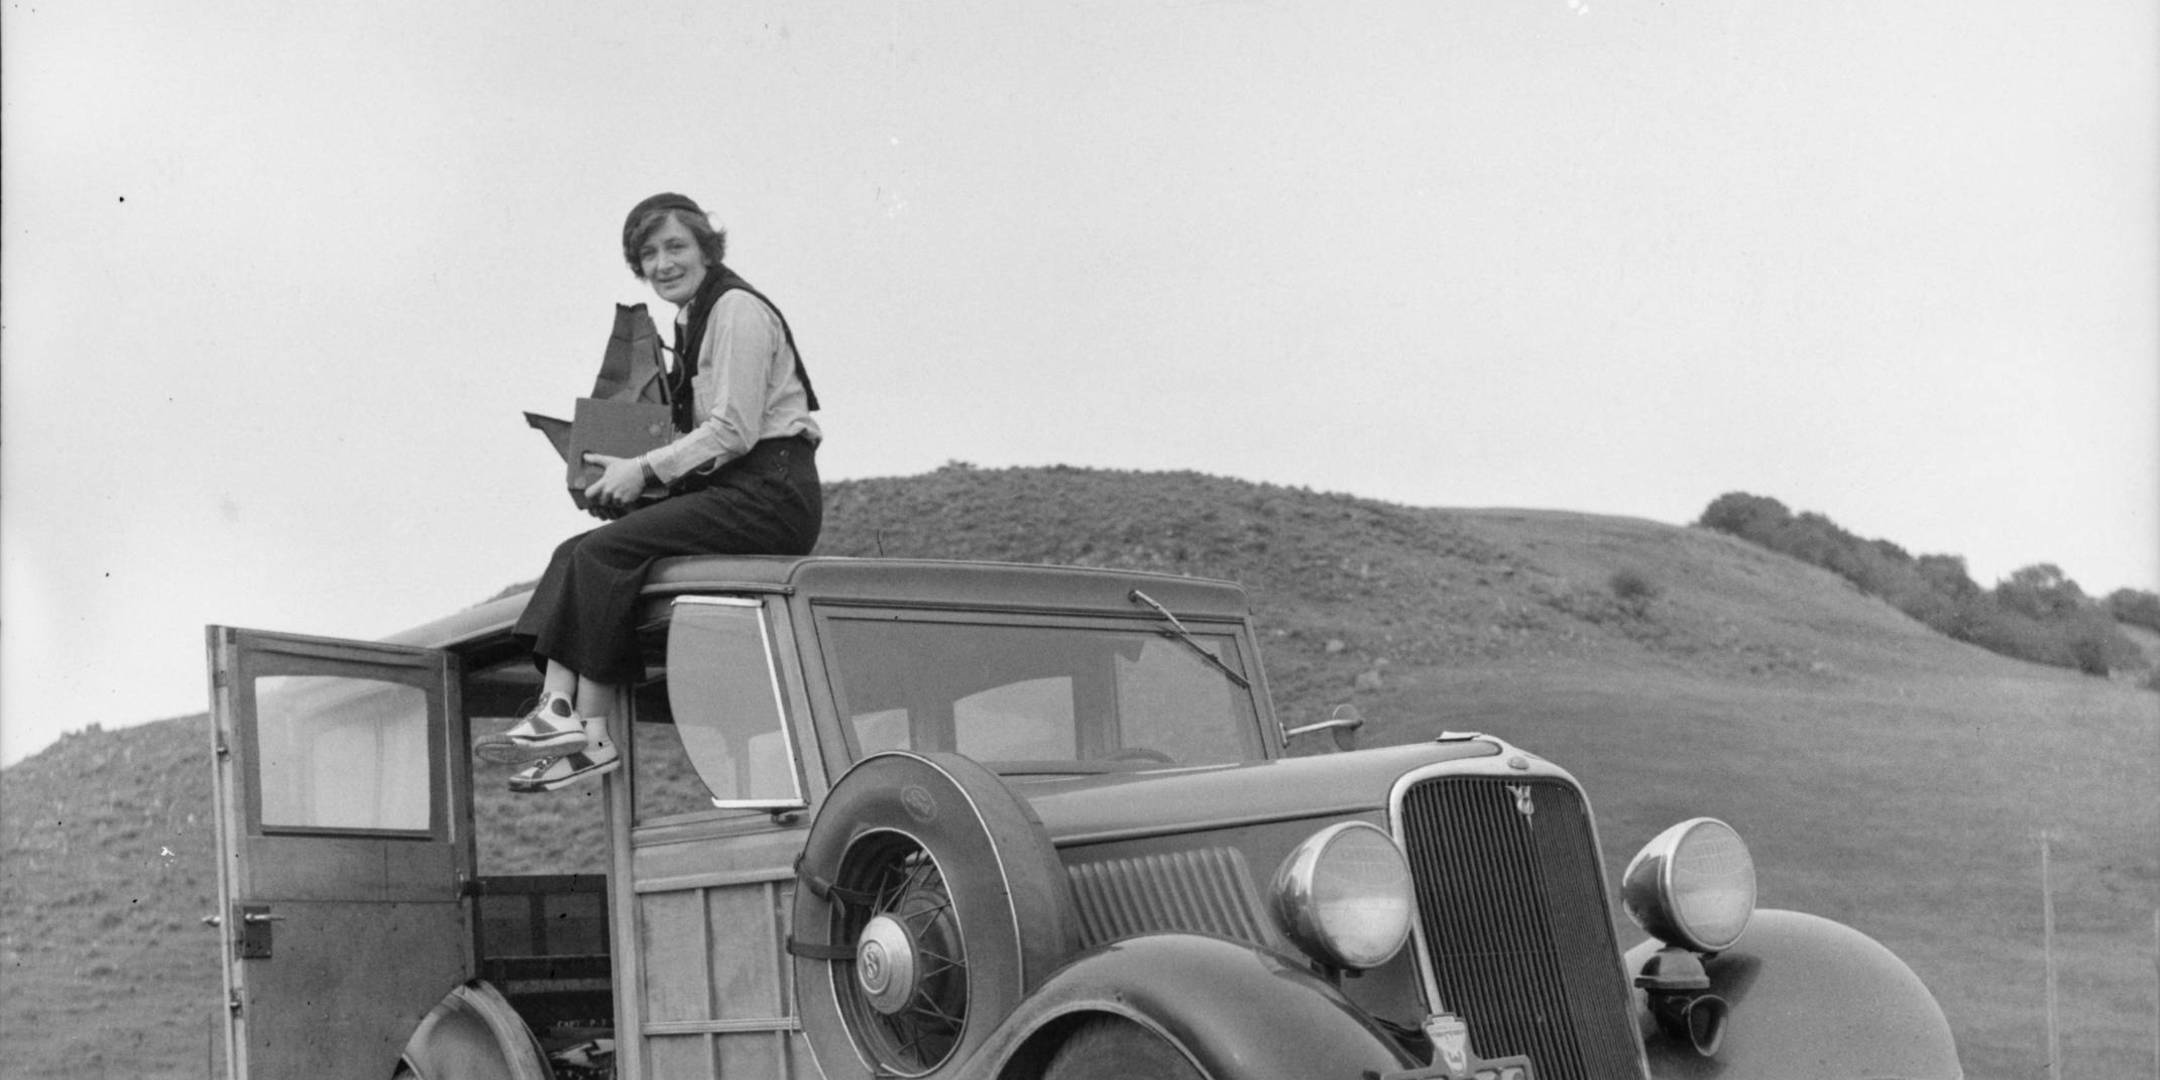 Dorothea Lange at work [Image courtesy Library of Congress LOC 8b27245a]